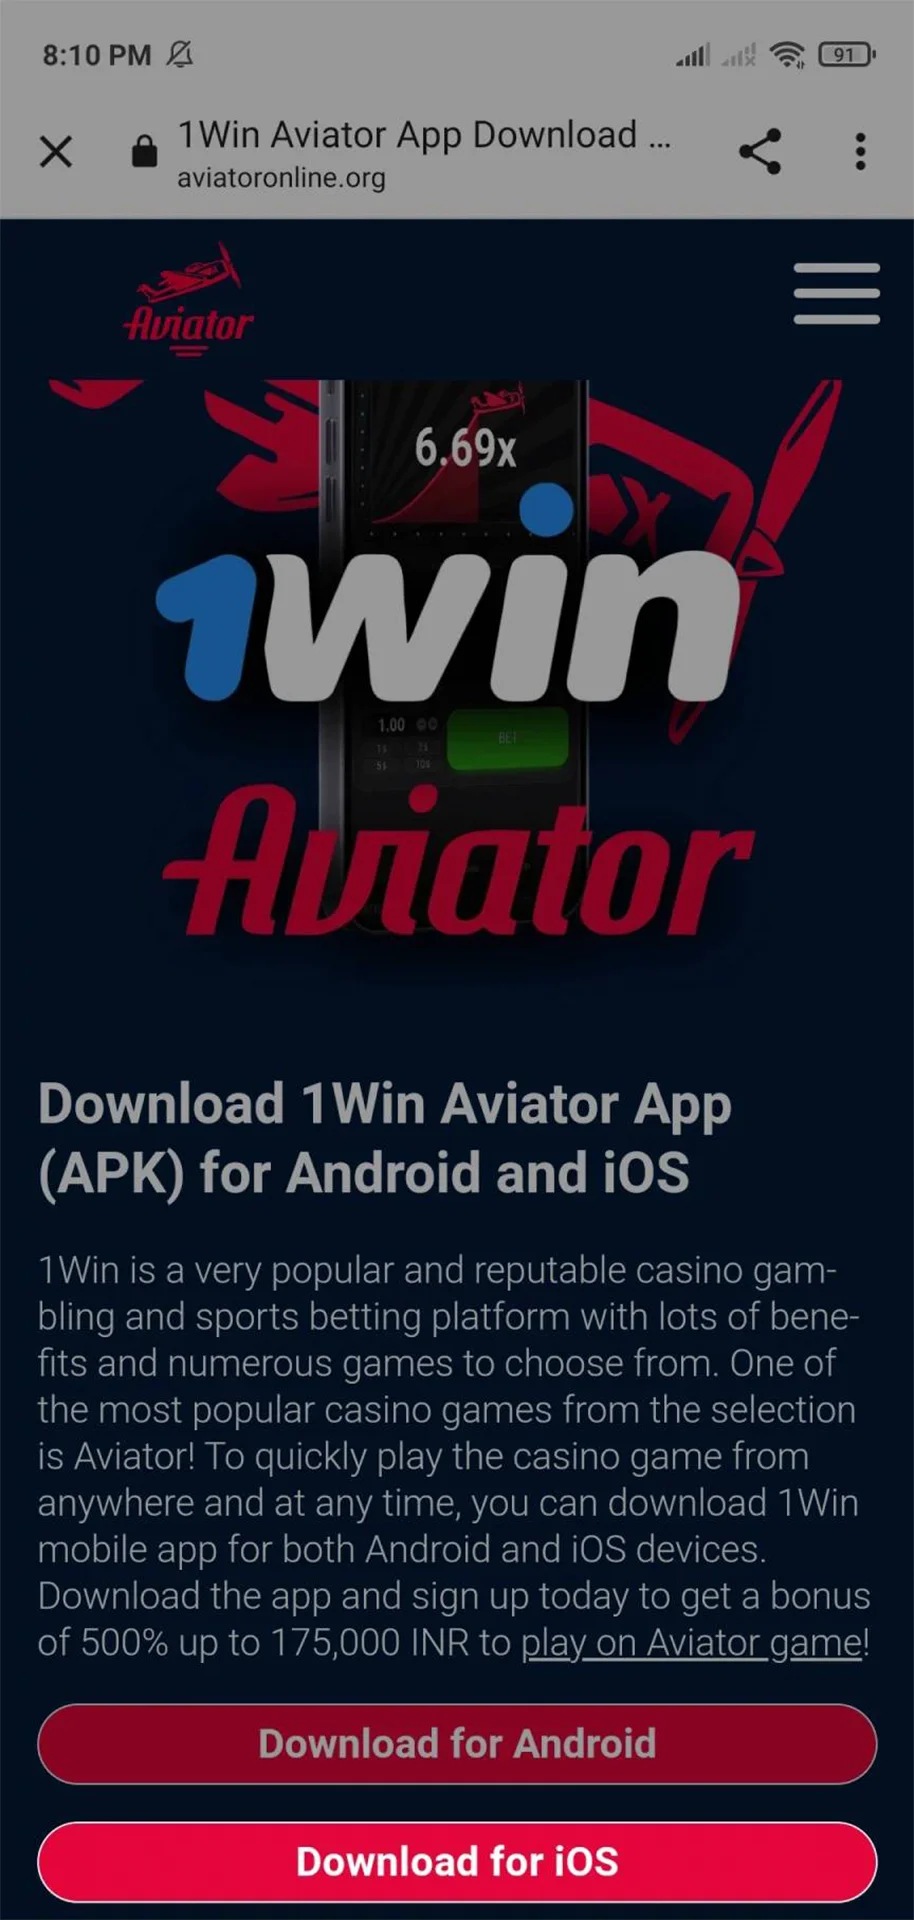 Follow the link to download the 1win app for iOS.